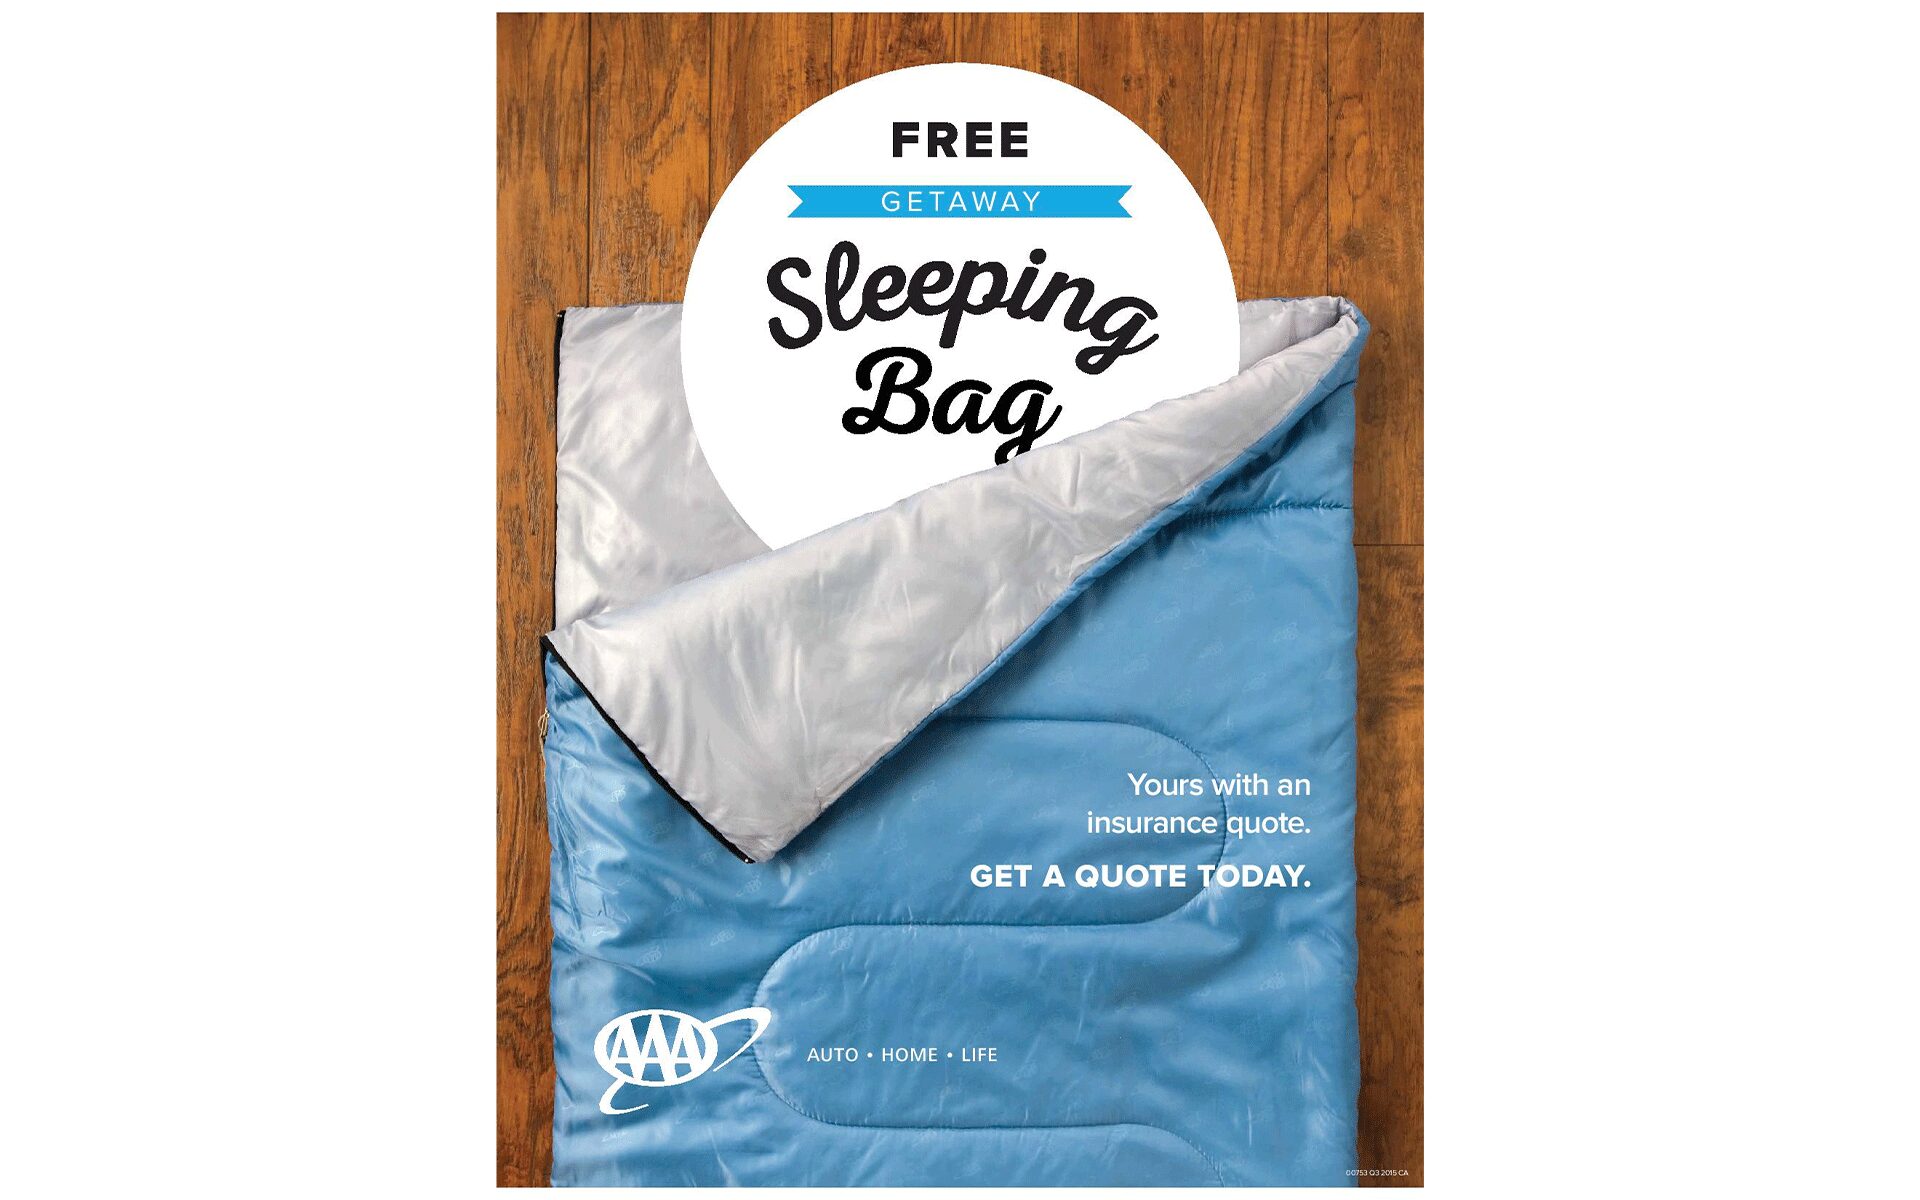 tgse-TEMP-gallery-test_0014_AAA-Sleeping-Bag-Poster-page-001